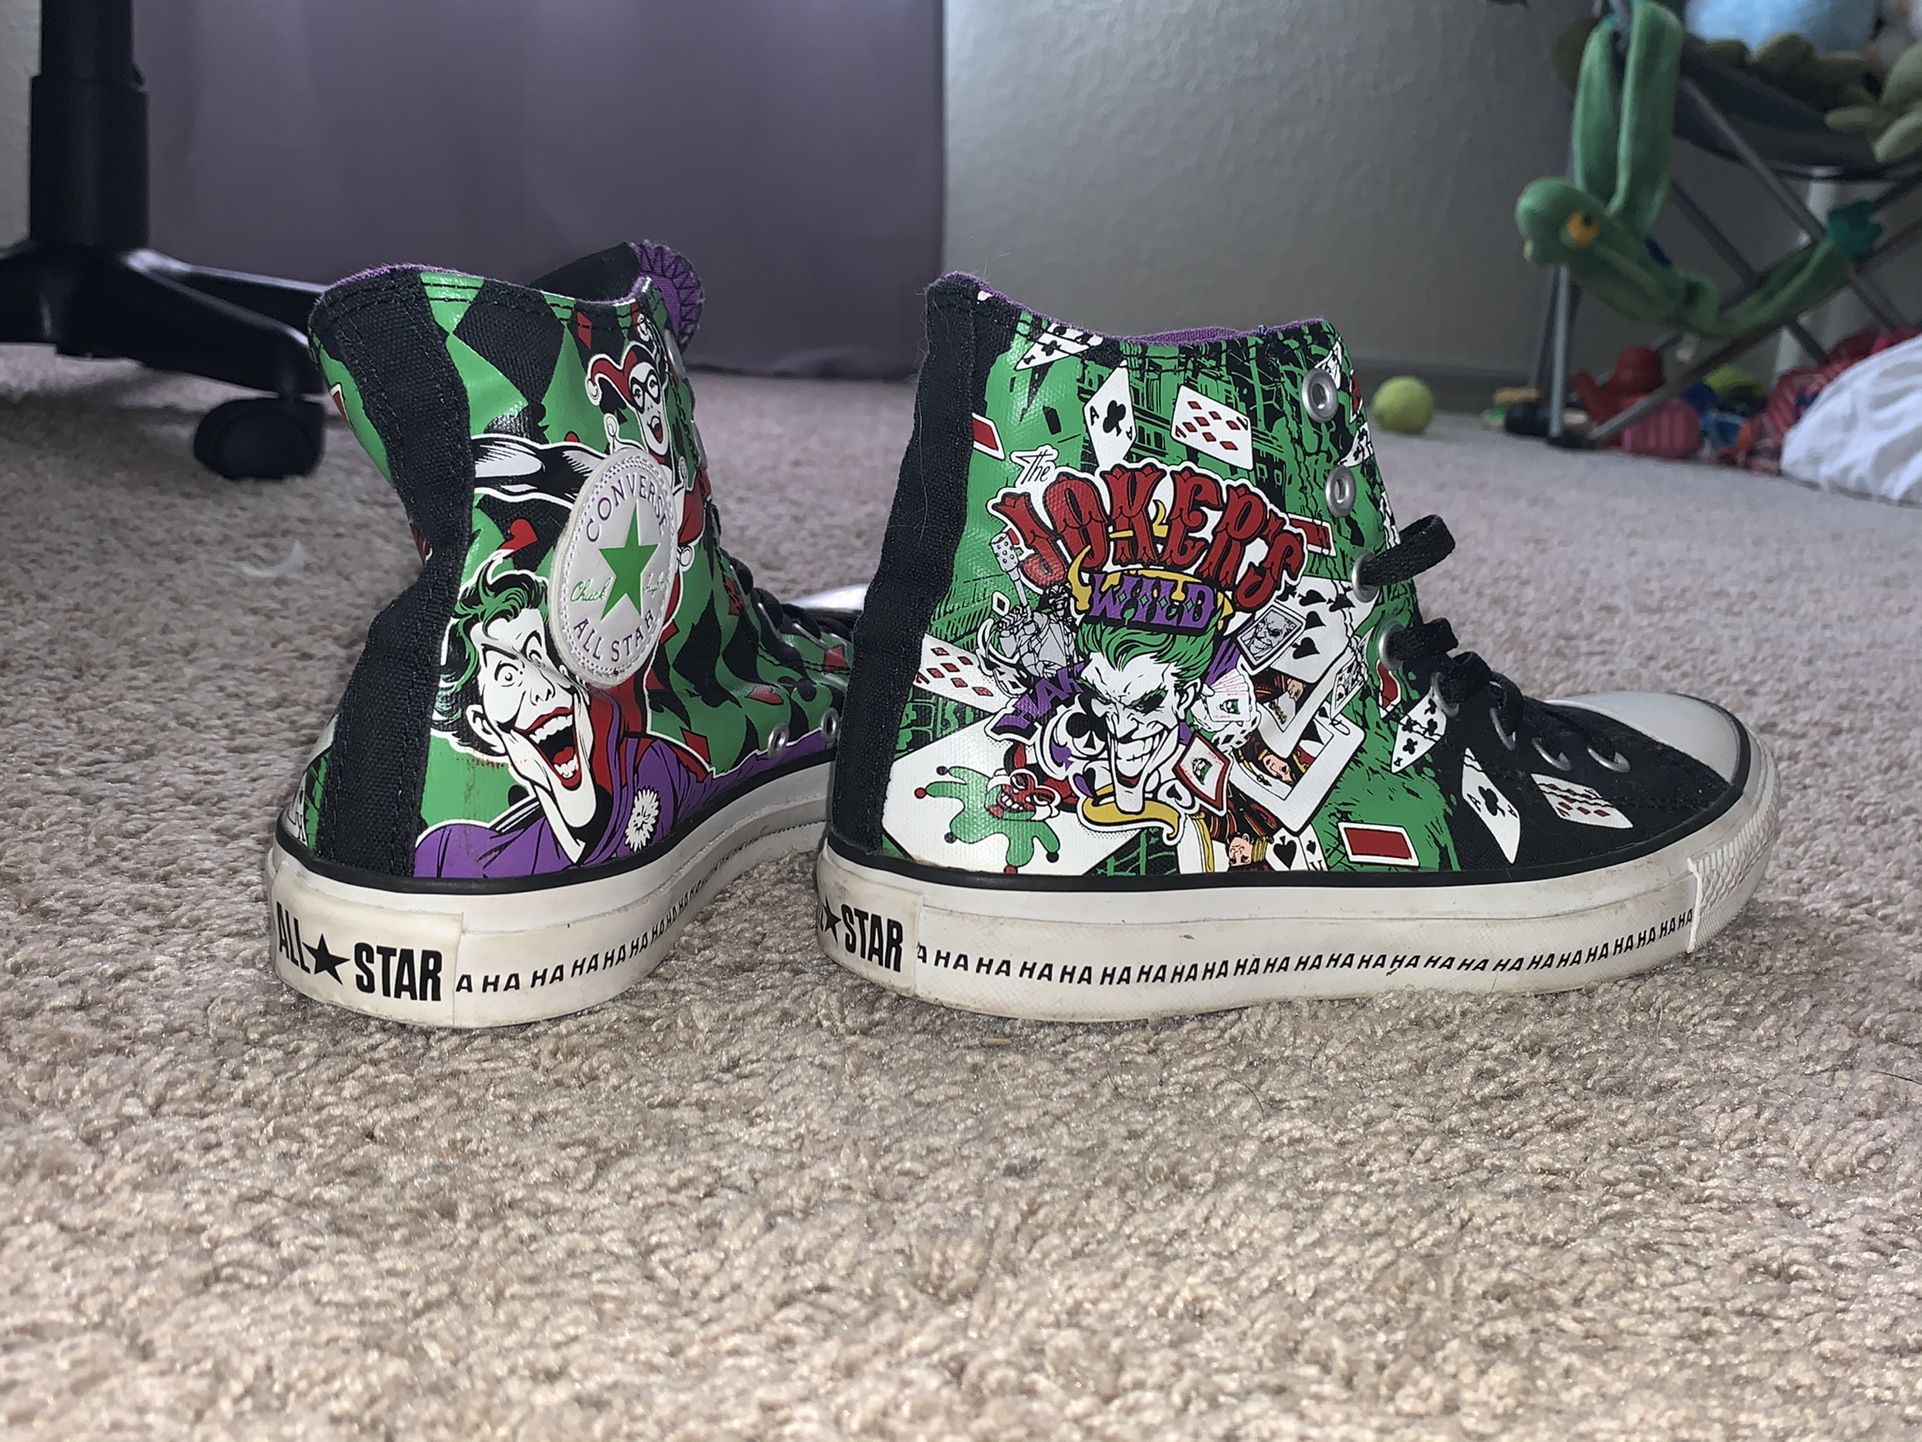 Special Edition 'Jokers Wild' Converse Sale in Aug FL OfferUp